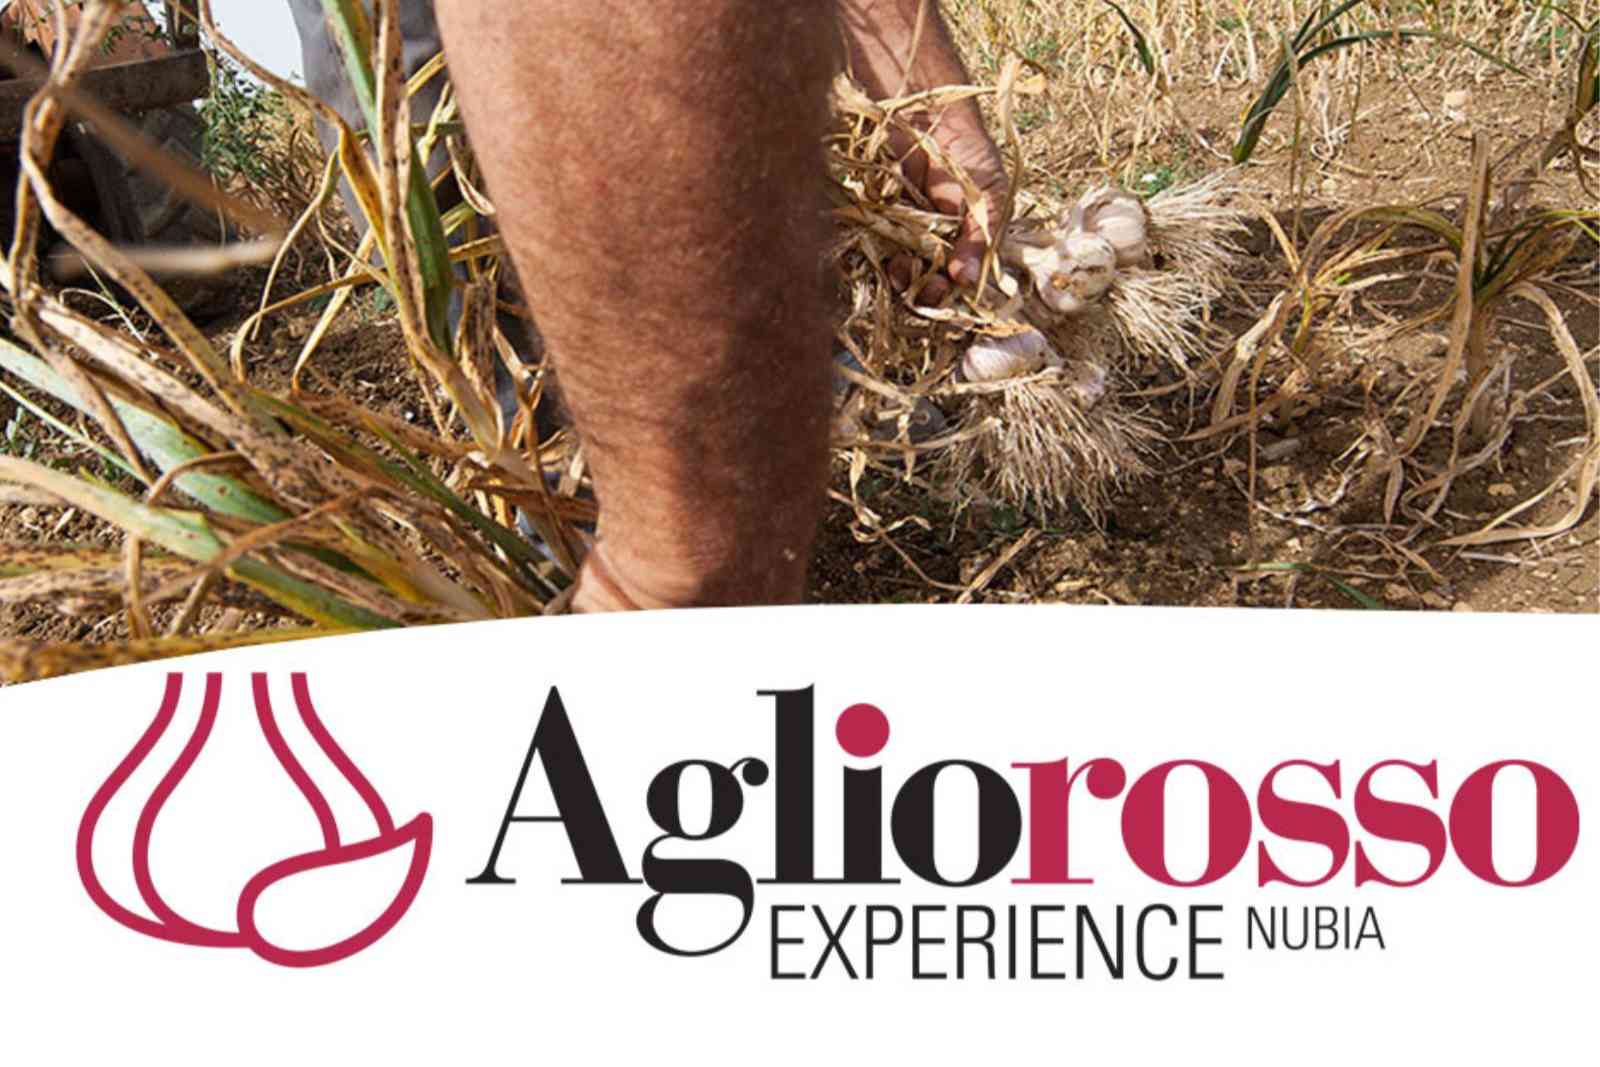 Nubia Red Garlic: the Experience starts on 12 June